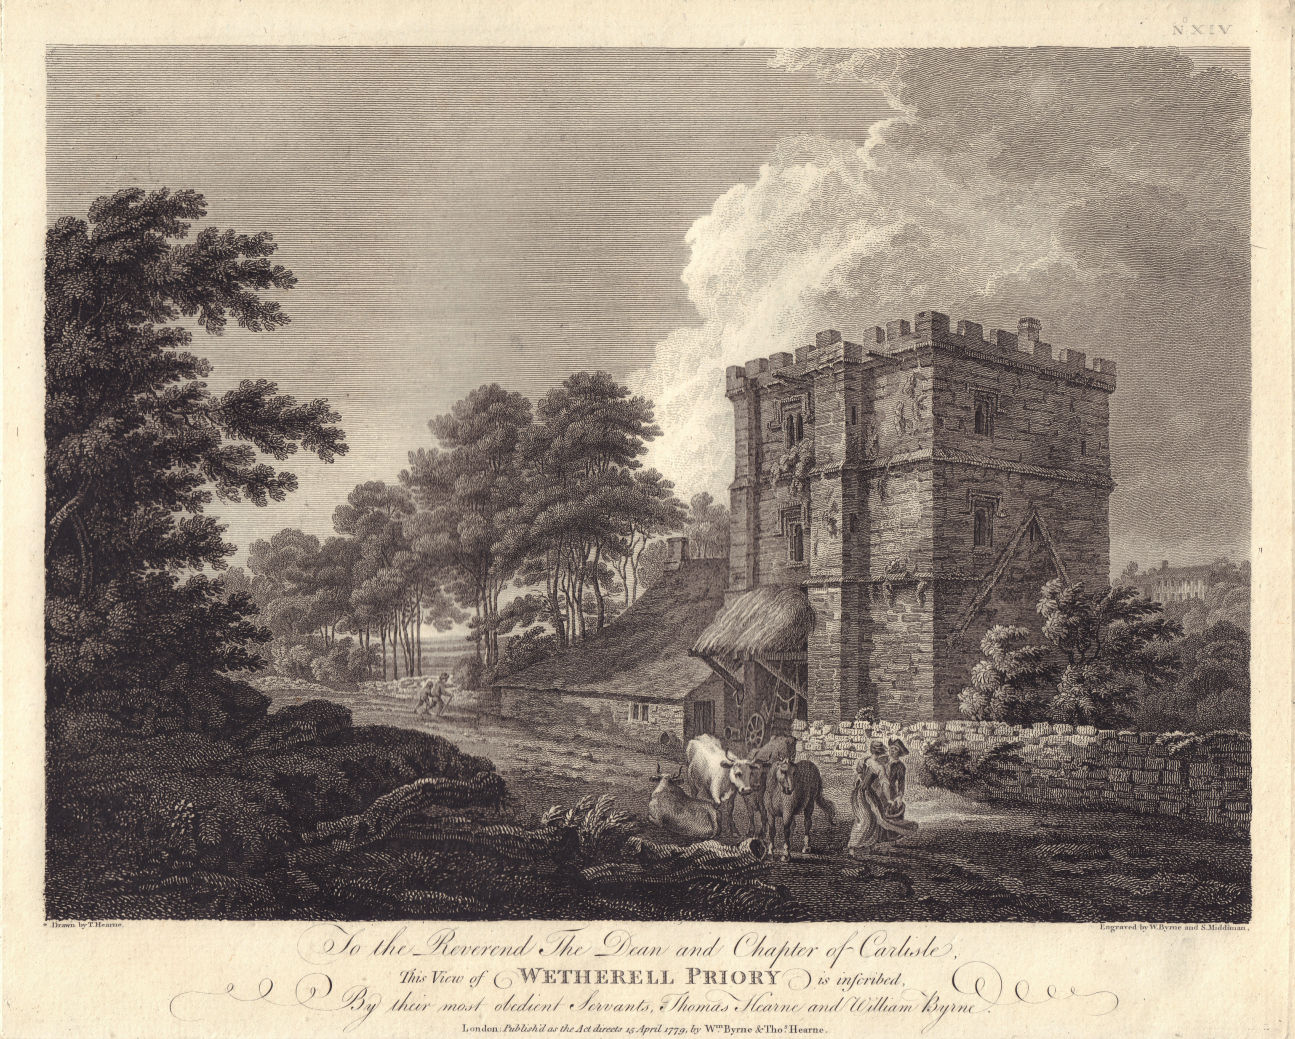 Wetherell Priory. Wetheral Priory, Cumbria. GROSE 1779 old antique print